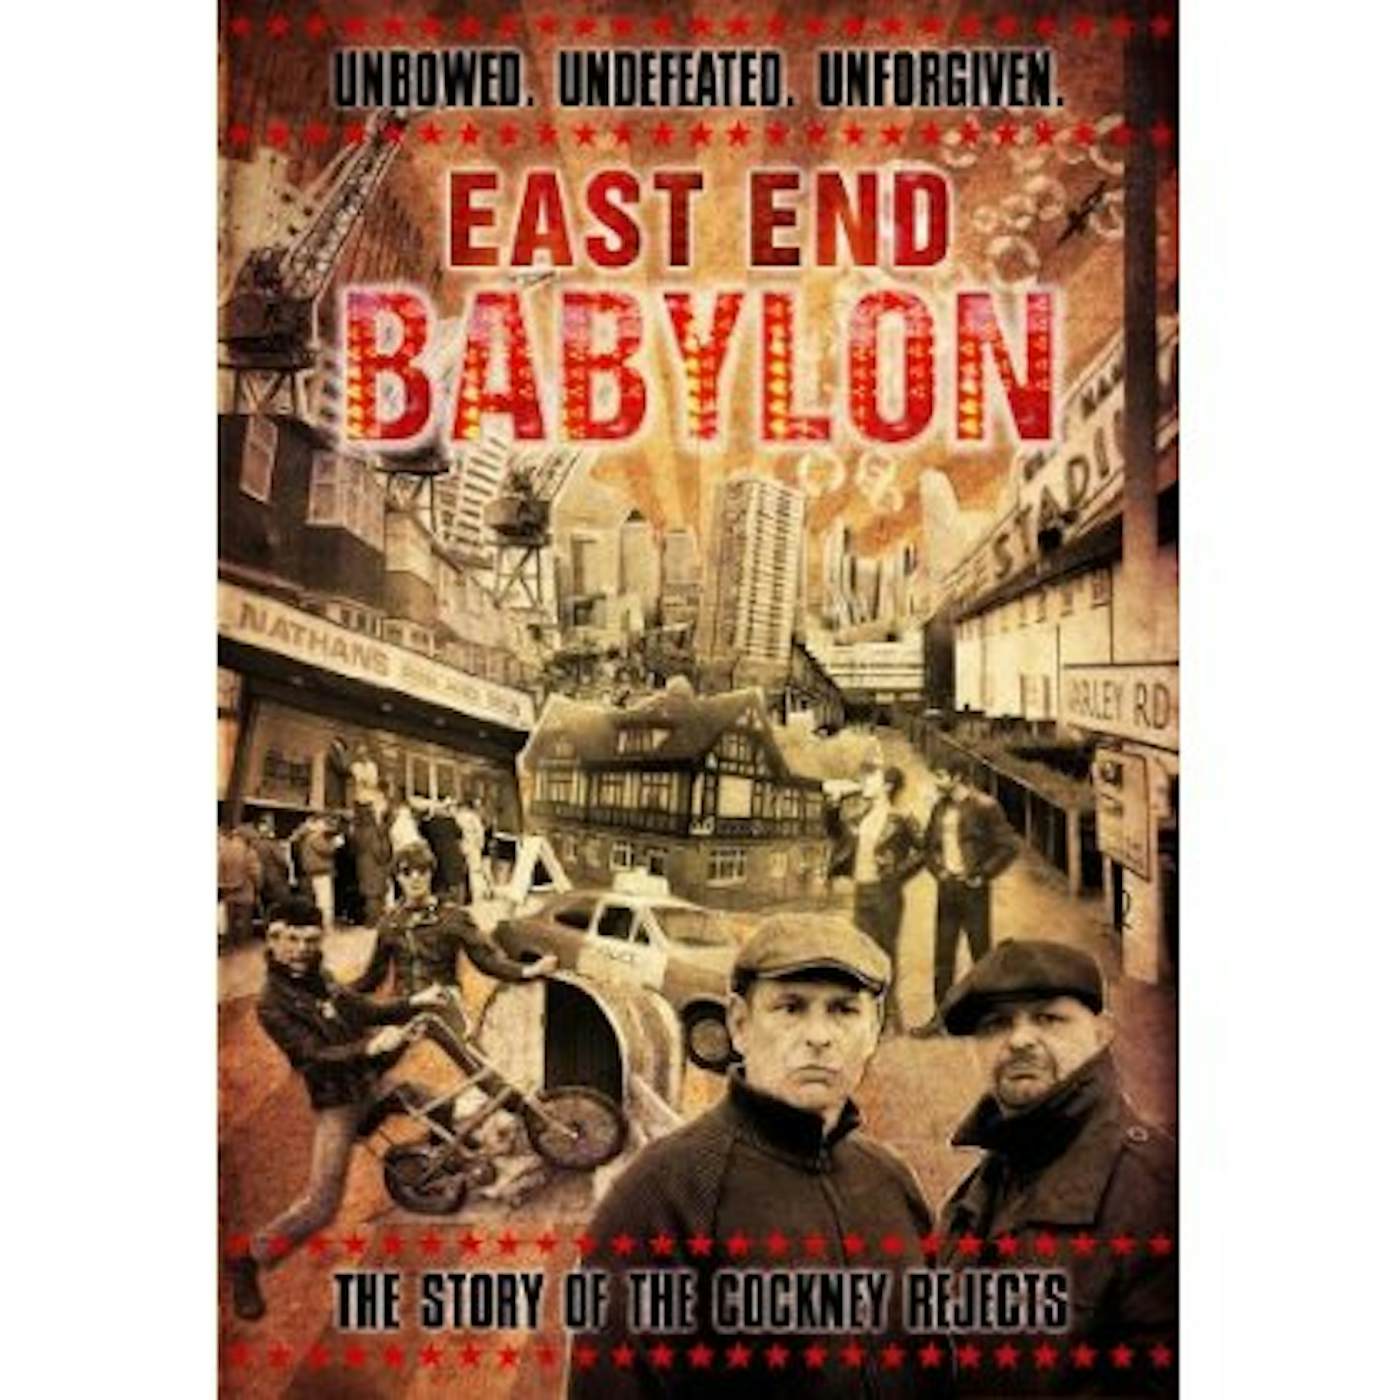 EAST END BABYLON: STORY OF THE COCKNEY REJECTS DVD